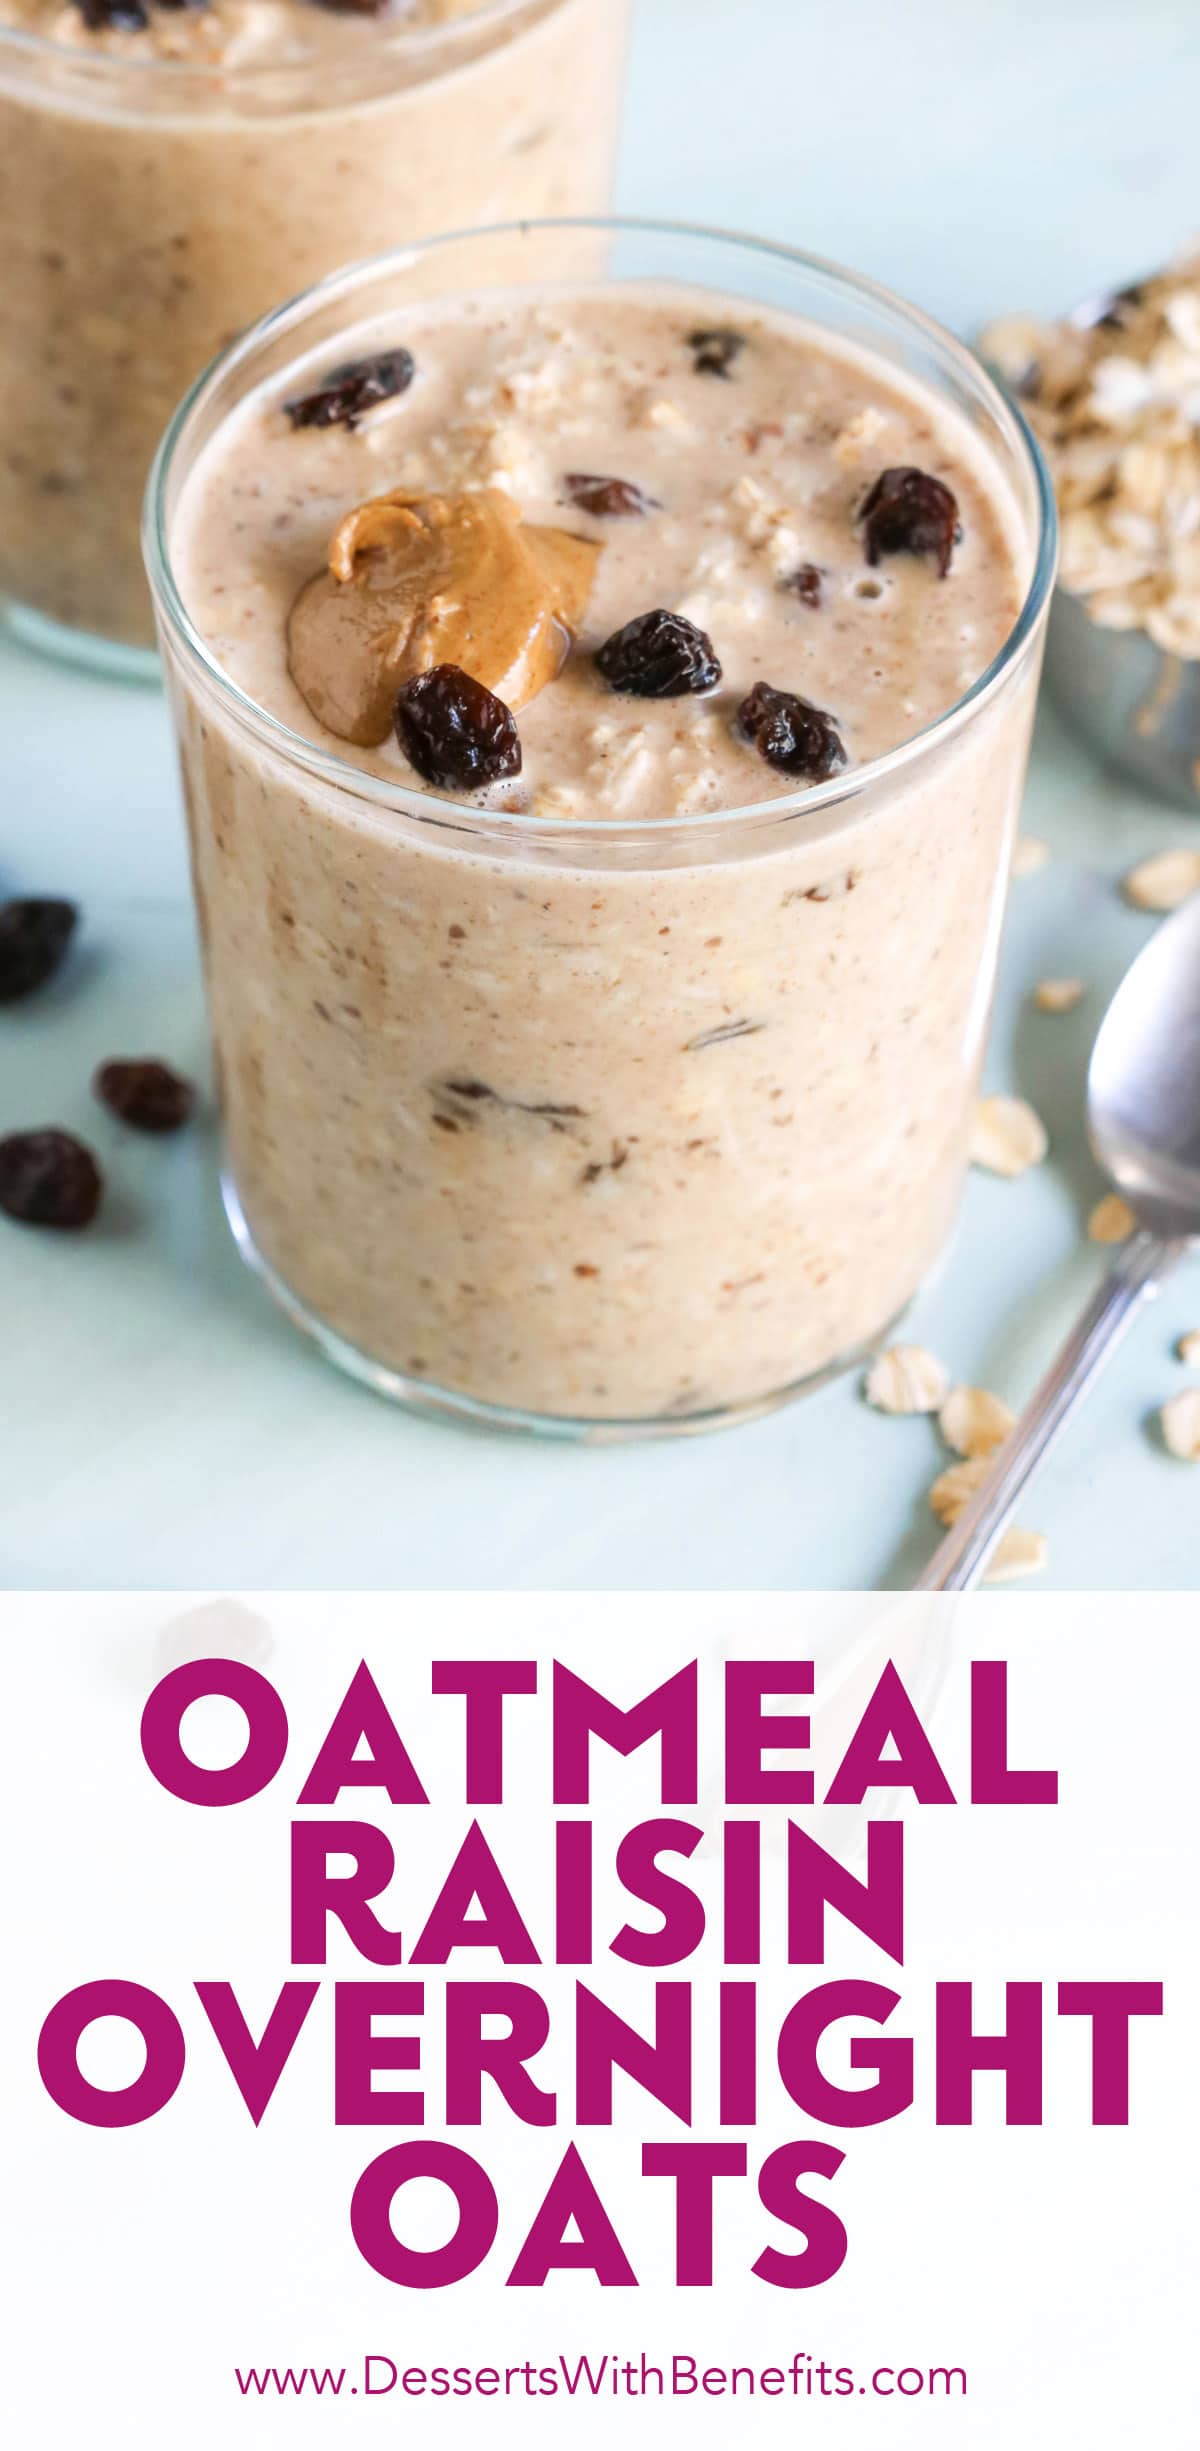 These Oatmeal Raisin Cookie Overnight Dessert Oats have all the flavor of oatmeal raisin cookies but in oatmeal form, and without the butter, oil, and sugar! Gluten free and vegan, and made with whole grain oats, nut butter, and a hint of vanilla and cinnamon.